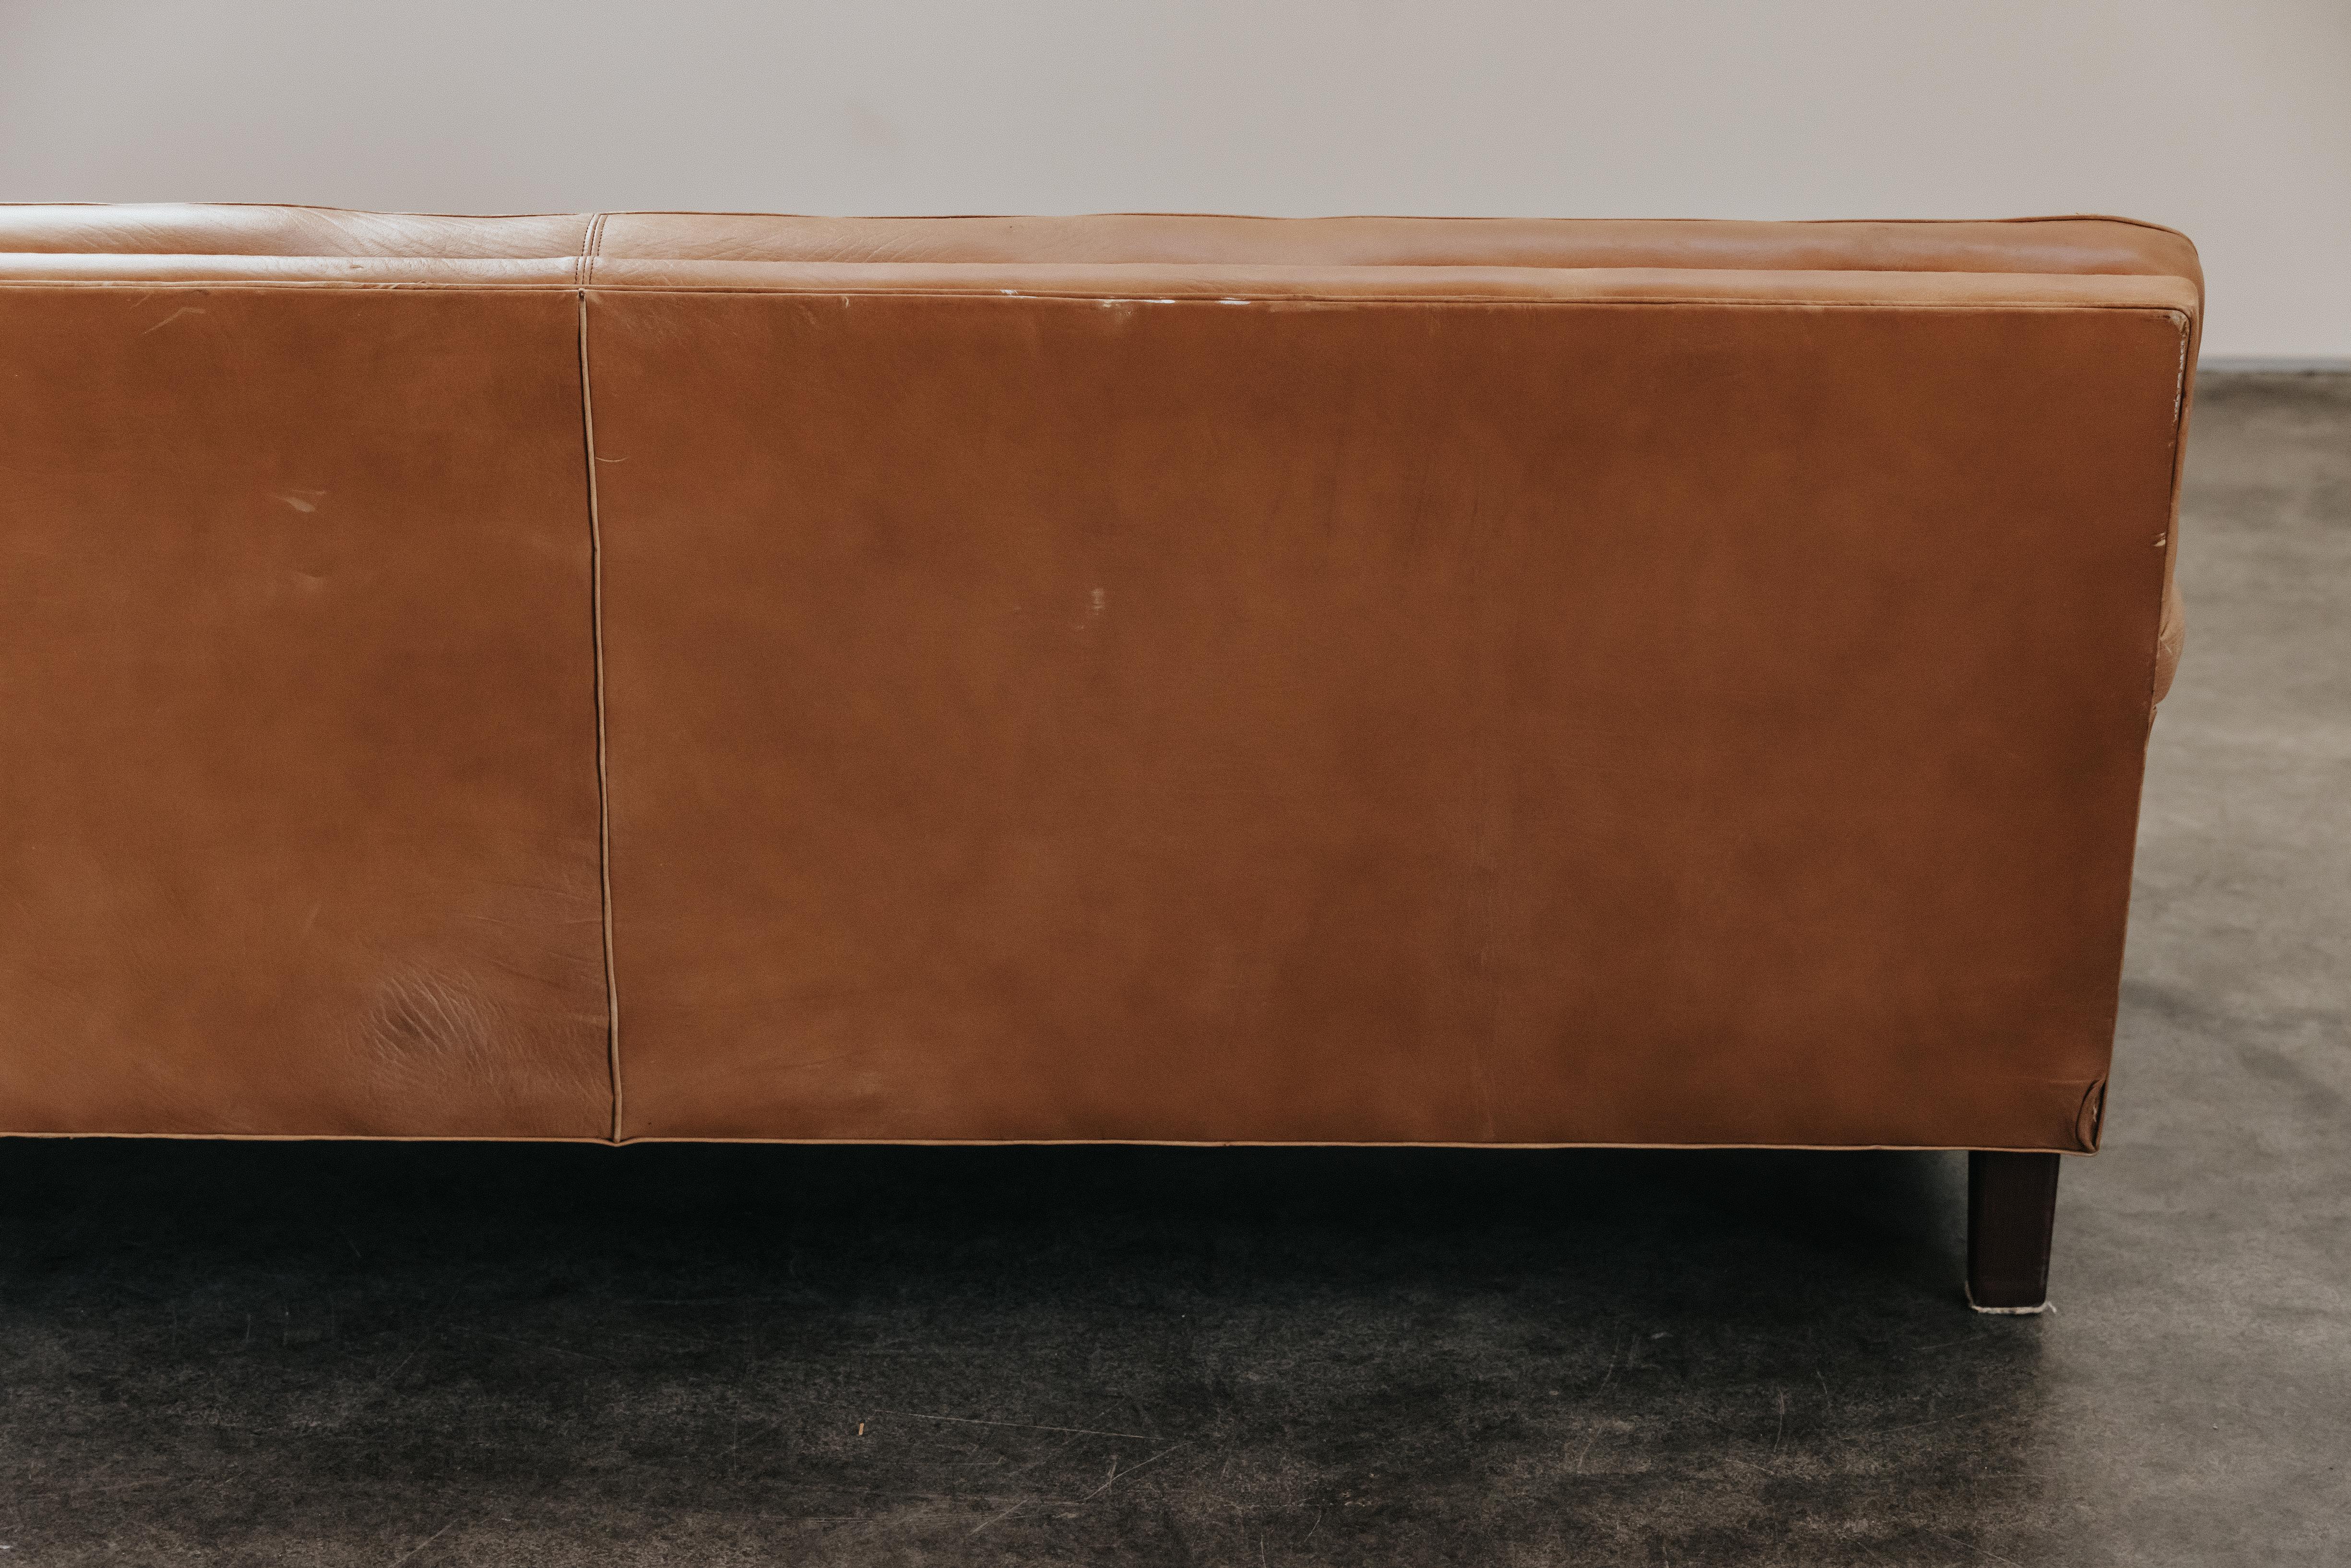 Vintage Arne Norell Leather Sofa, Model Merker, From Sweden Circa 1970 In Good Condition For Sale In Nashville, TN